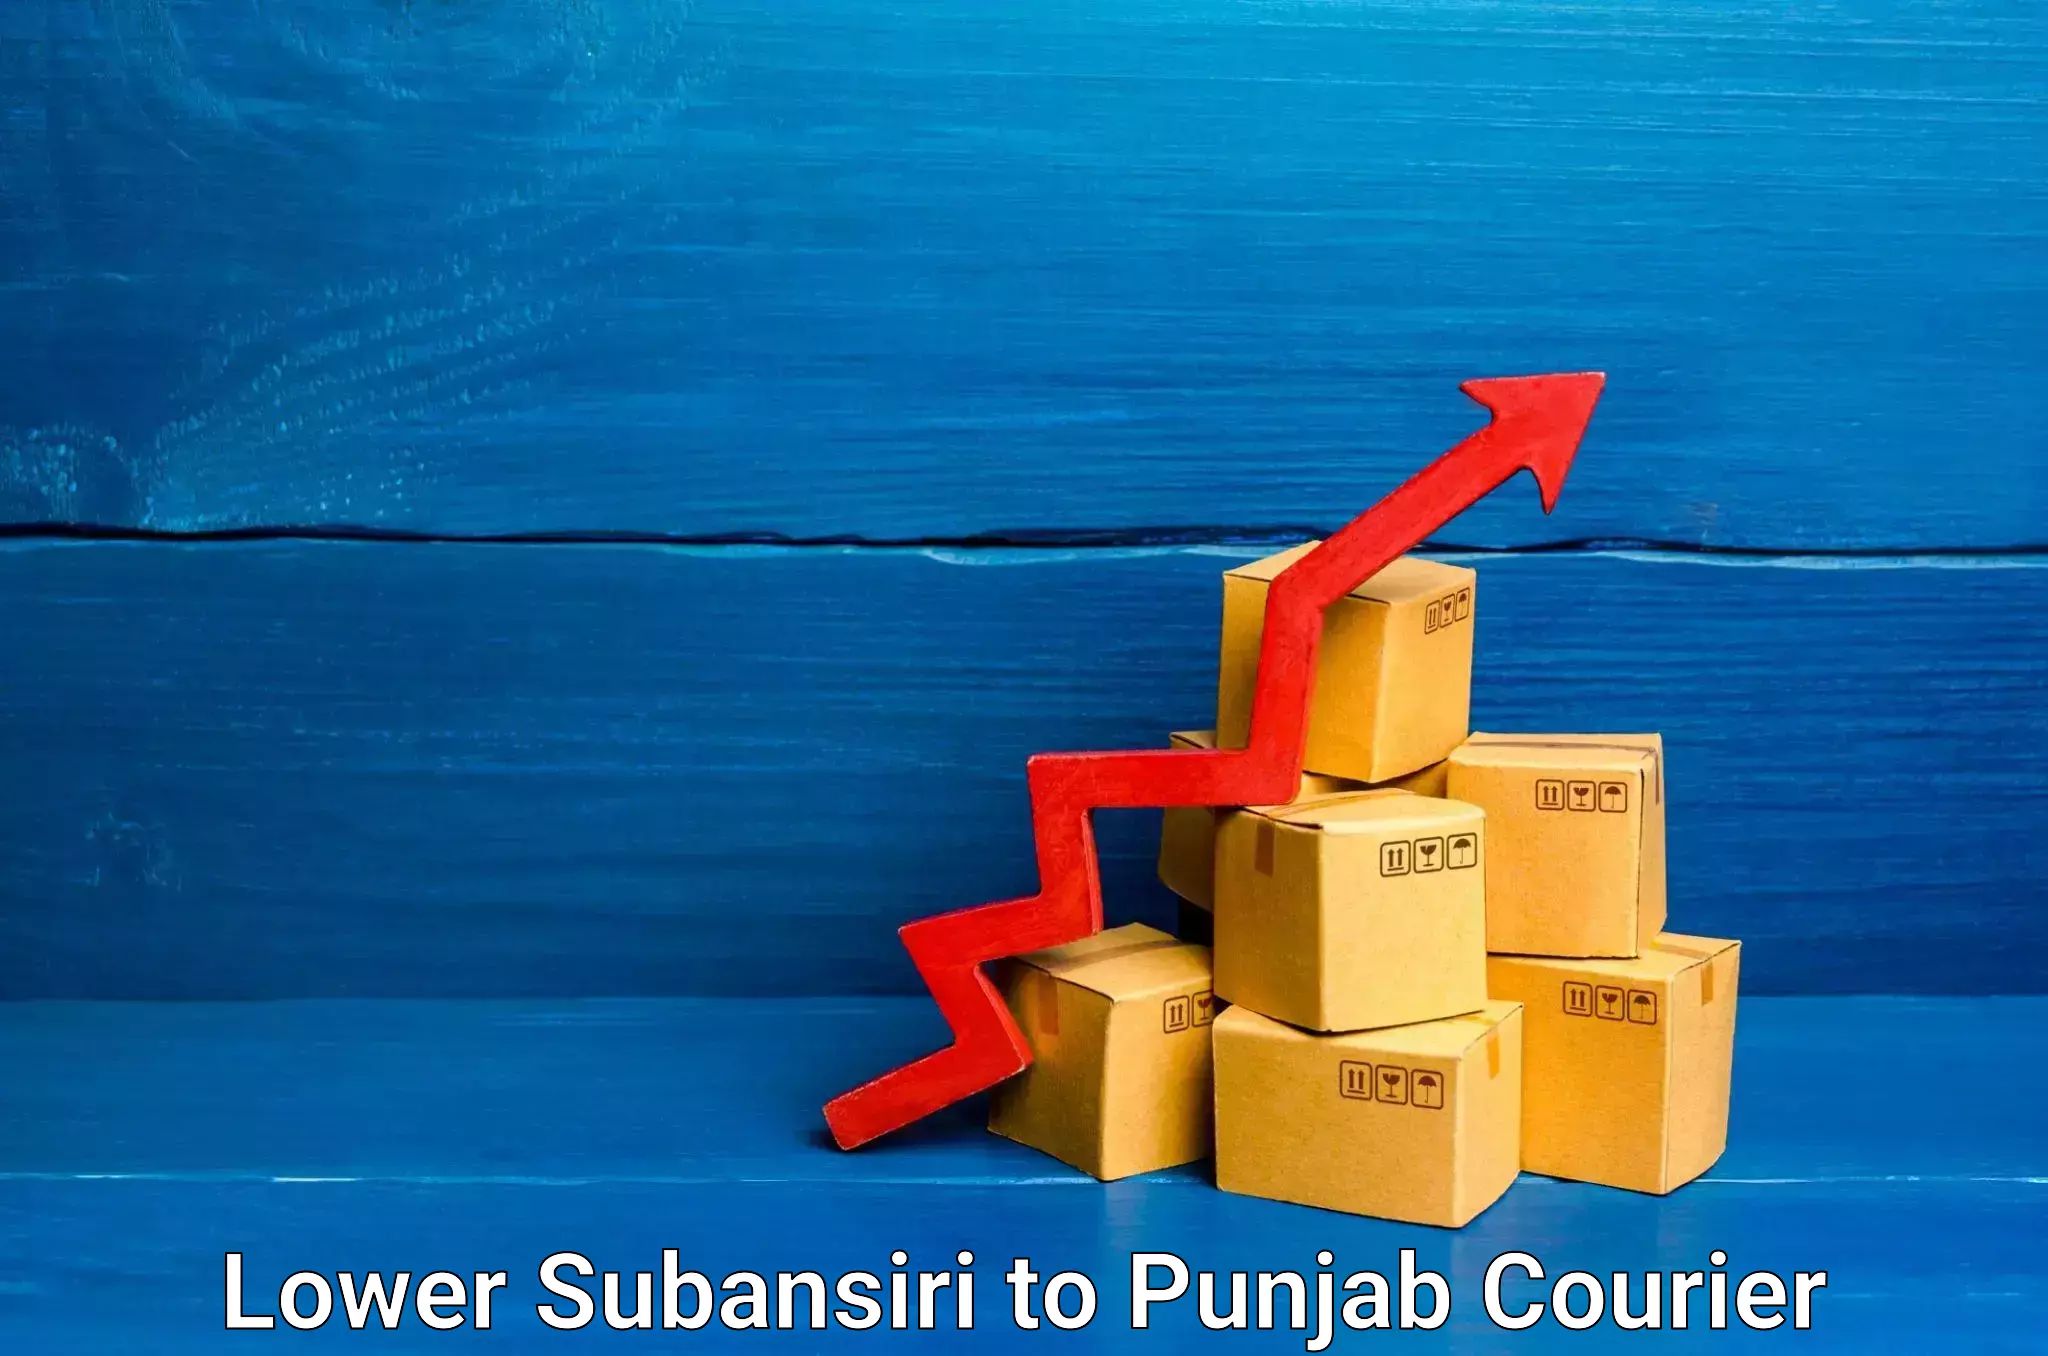 Personal courier services Lower Subansiri to Mohali